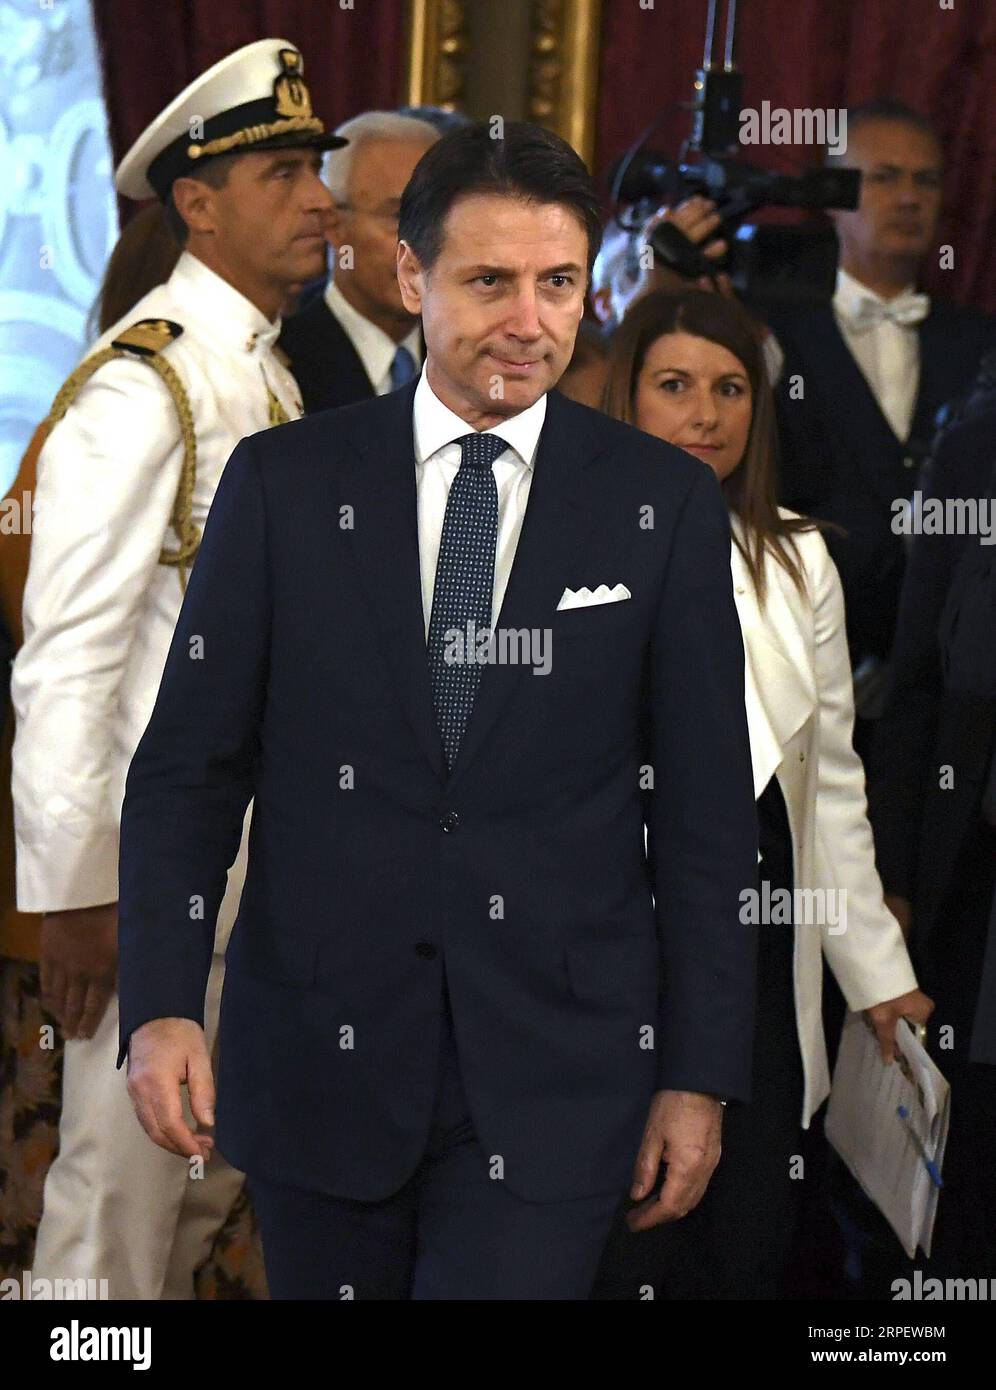 (190905) -- ROME, Sept. 5, 2019 -- Italian Prime Minister Giuseppe Conte arrives for a swearing-in ceremony at the Quirinale Presidential Palace in Rome, Italy, on Sept. 5, 2019. The new slate of ministers for Giuseppe Conte s second stint as Italy s prime minister was formally sworn in on Thursday by Italian President Sergio Mattarella, bringing the unlikely coalition between Italian populists and an old-guard center-left party a step away from power. (Photo by /Xinhua) ITALY-ROME-NEW MINISTERS-SWORN IN AlbertoxLingria PUBLICATIONxNOTxINxCHN Stock Photo